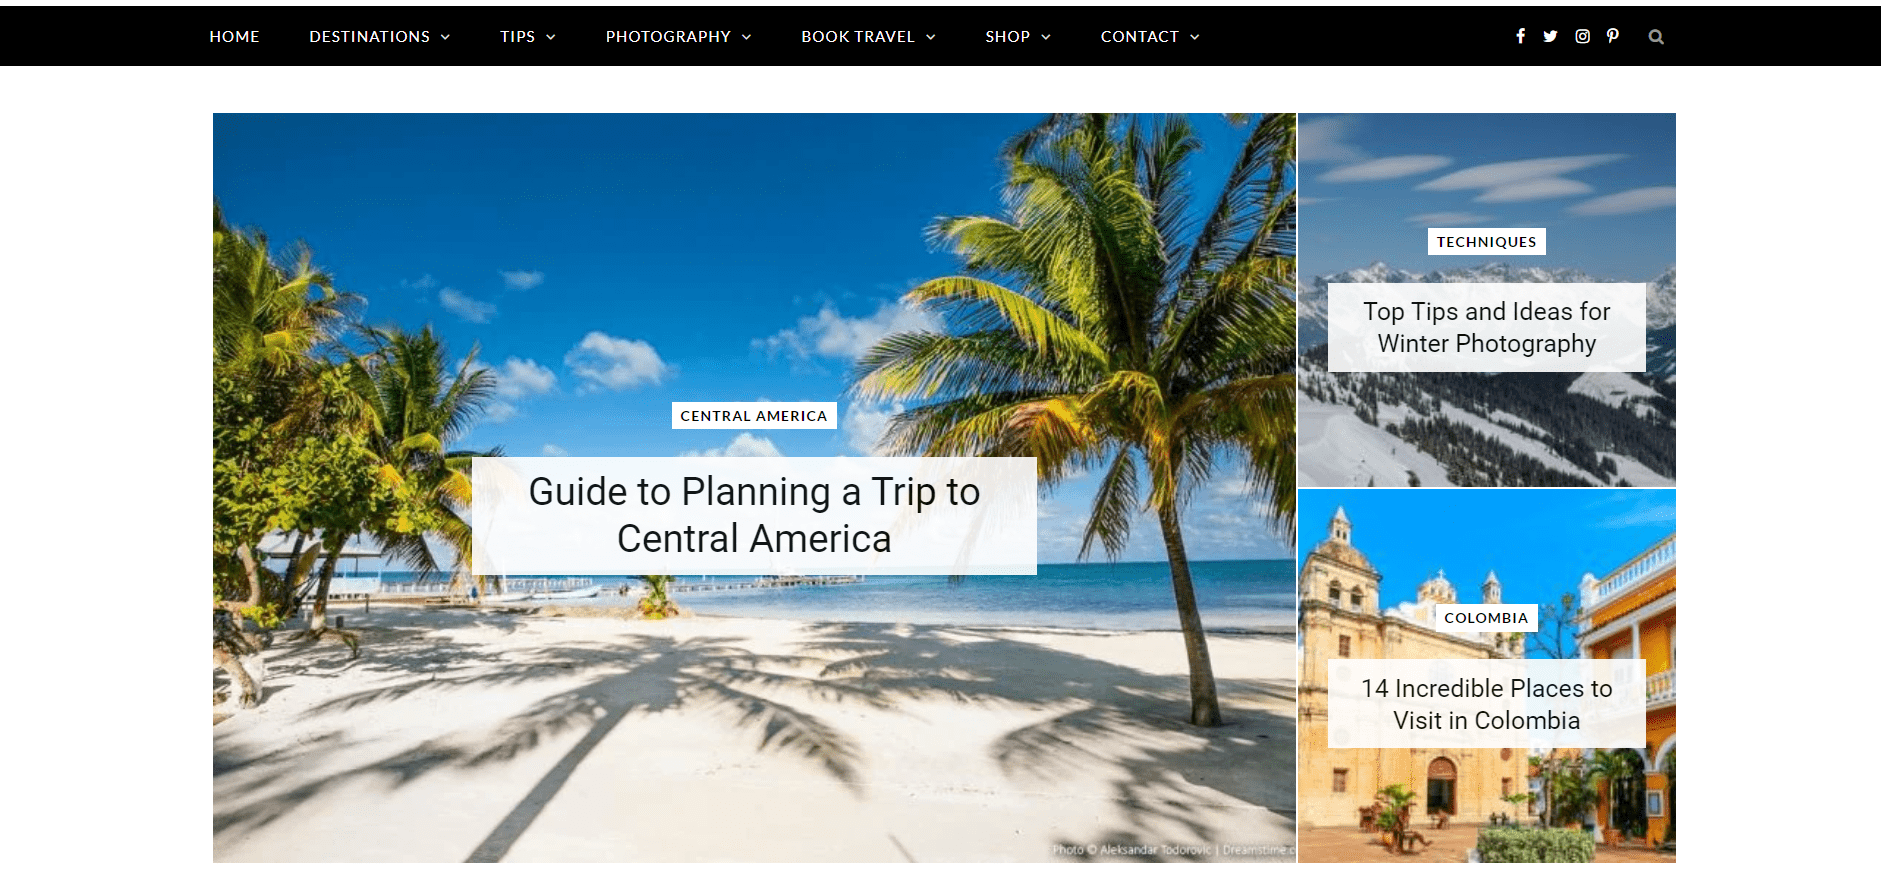 A screenshot of the Travel & Destinations travel blog featuring the most recent blog posts.

